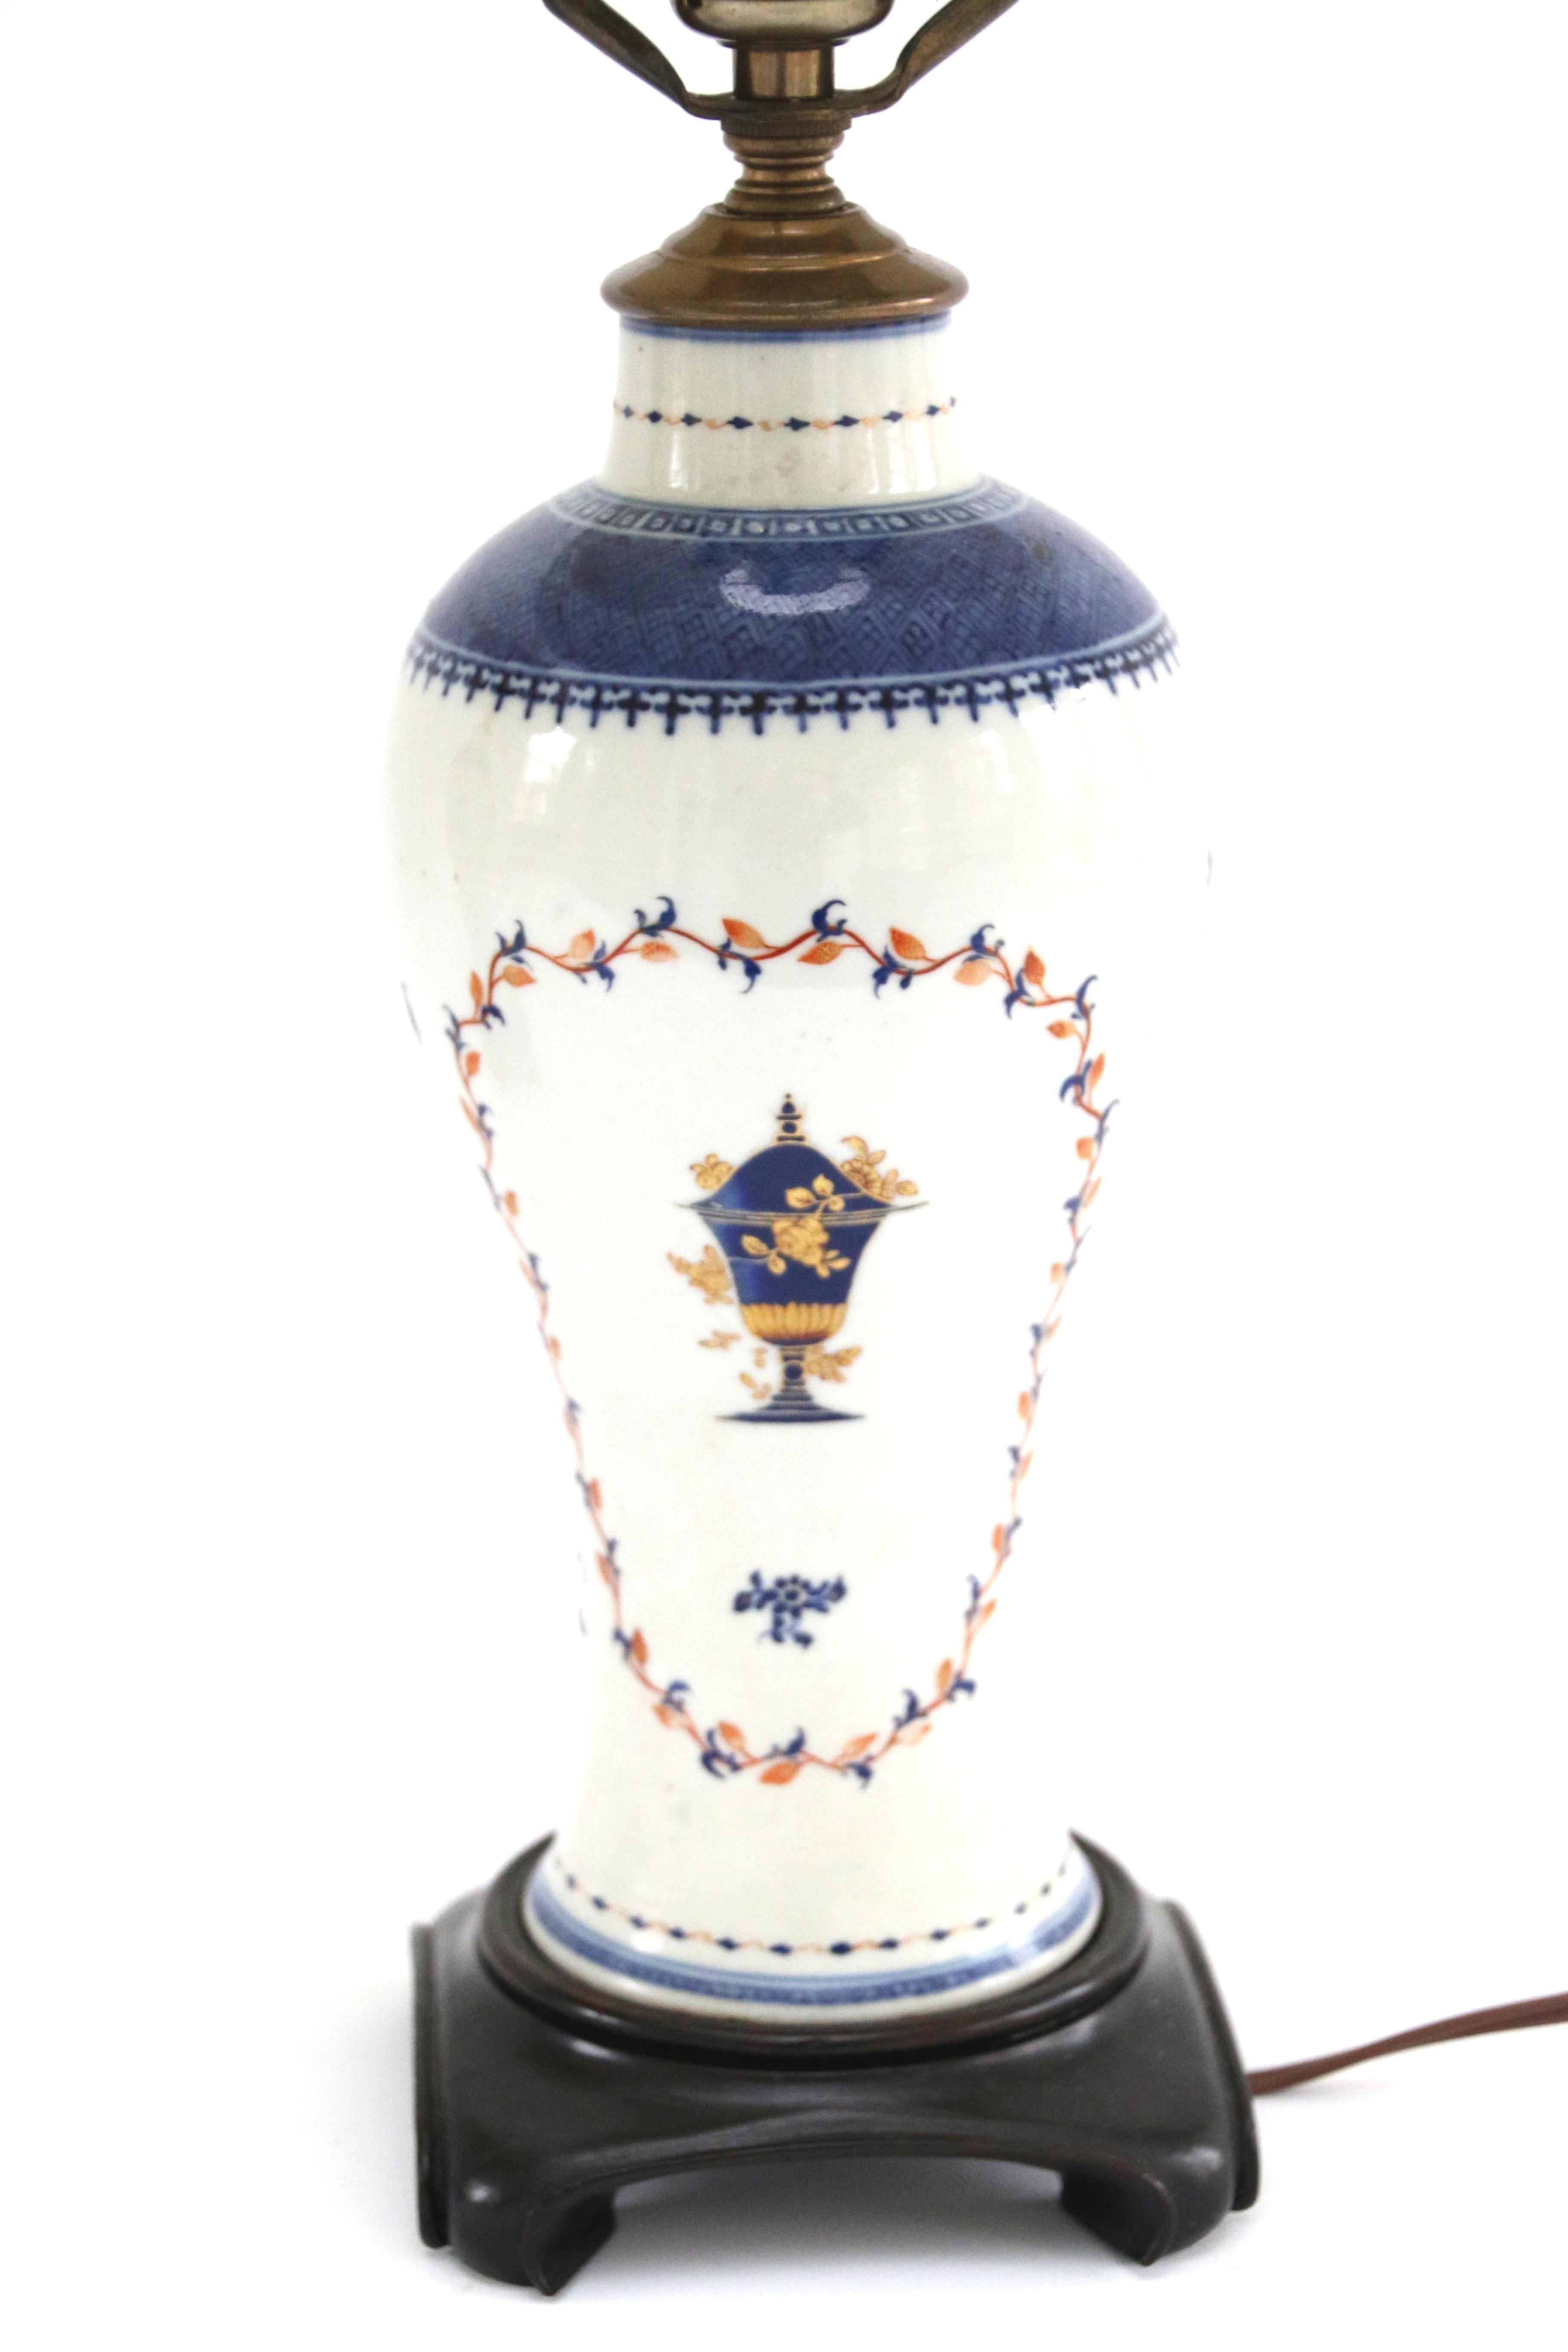 Pair of 18th century Chinese porcelain baluster-form vases featuring an urn and vine decoration in blue and gold. Later fitted as lamps on wooden bases. Vases are 9.75 inches tall (11.5 inches with base); height to top of finial is 22.5 inches,